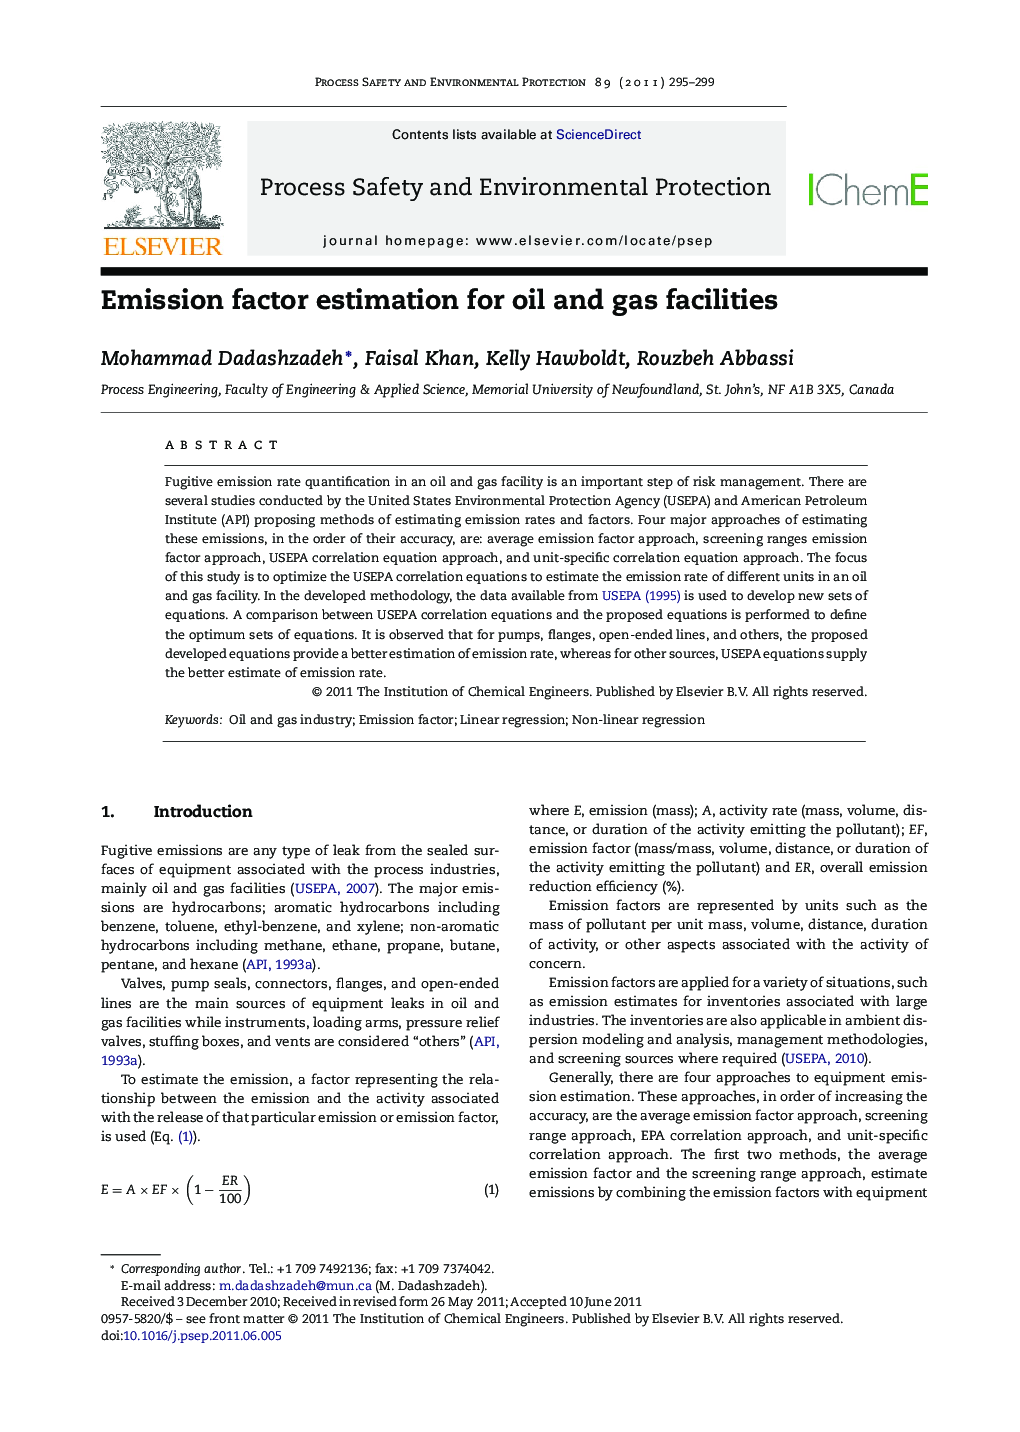 Emission factor estimation for oil and gas facilities